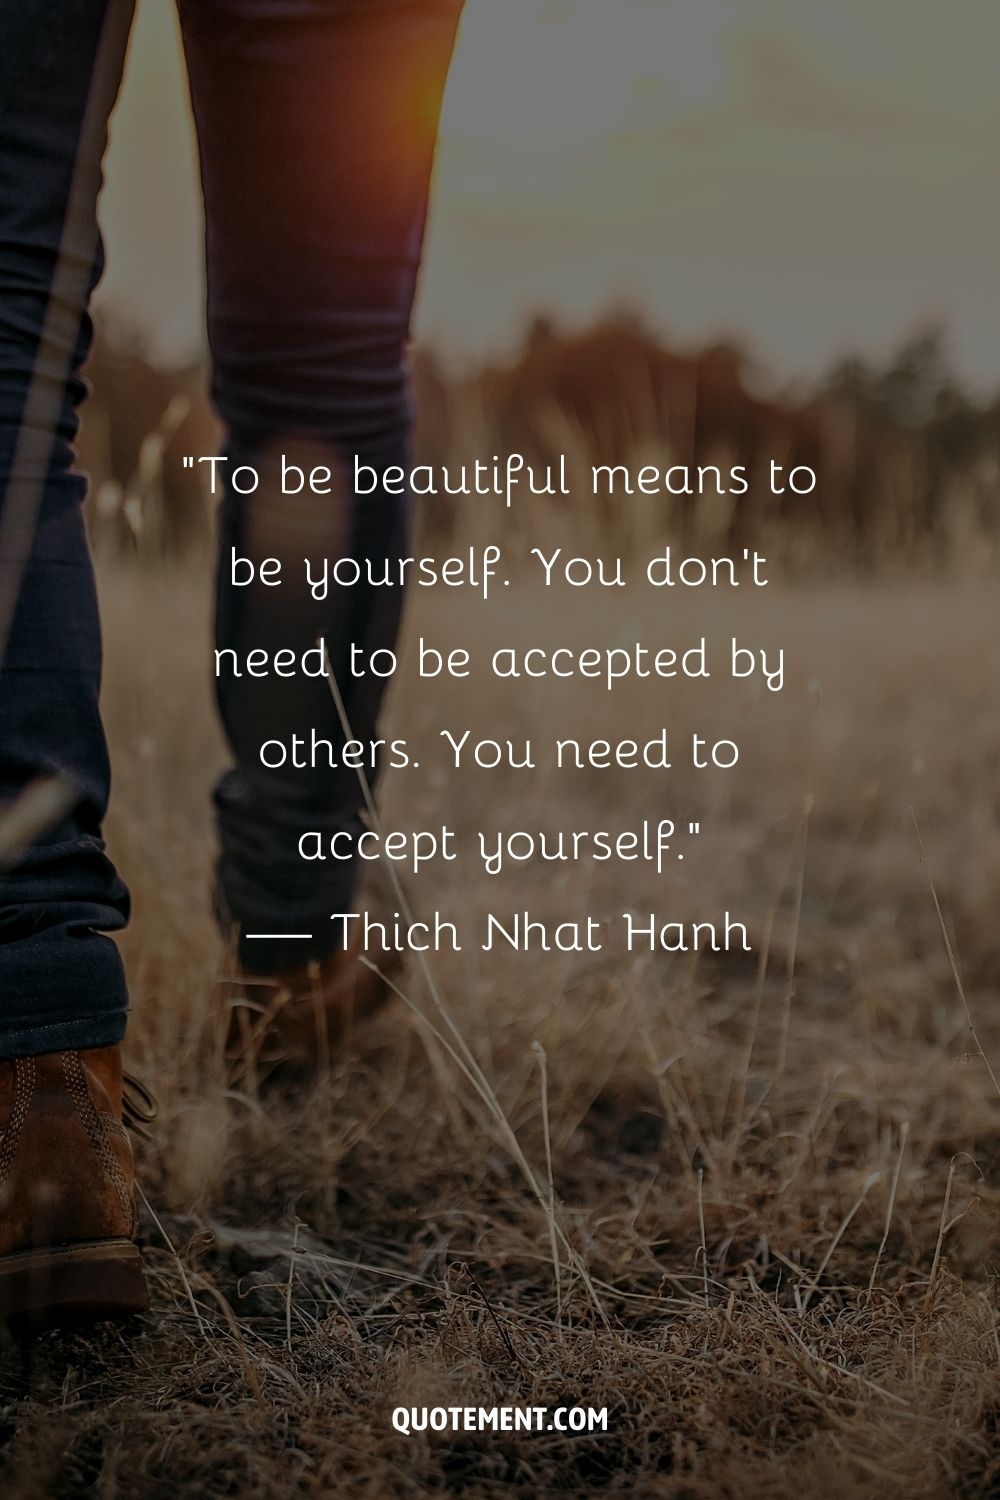 “To be beautiful means to be yourself. You don’t need to be accepted by others. You need to accept yourself.” — Thich Nhat Hanh